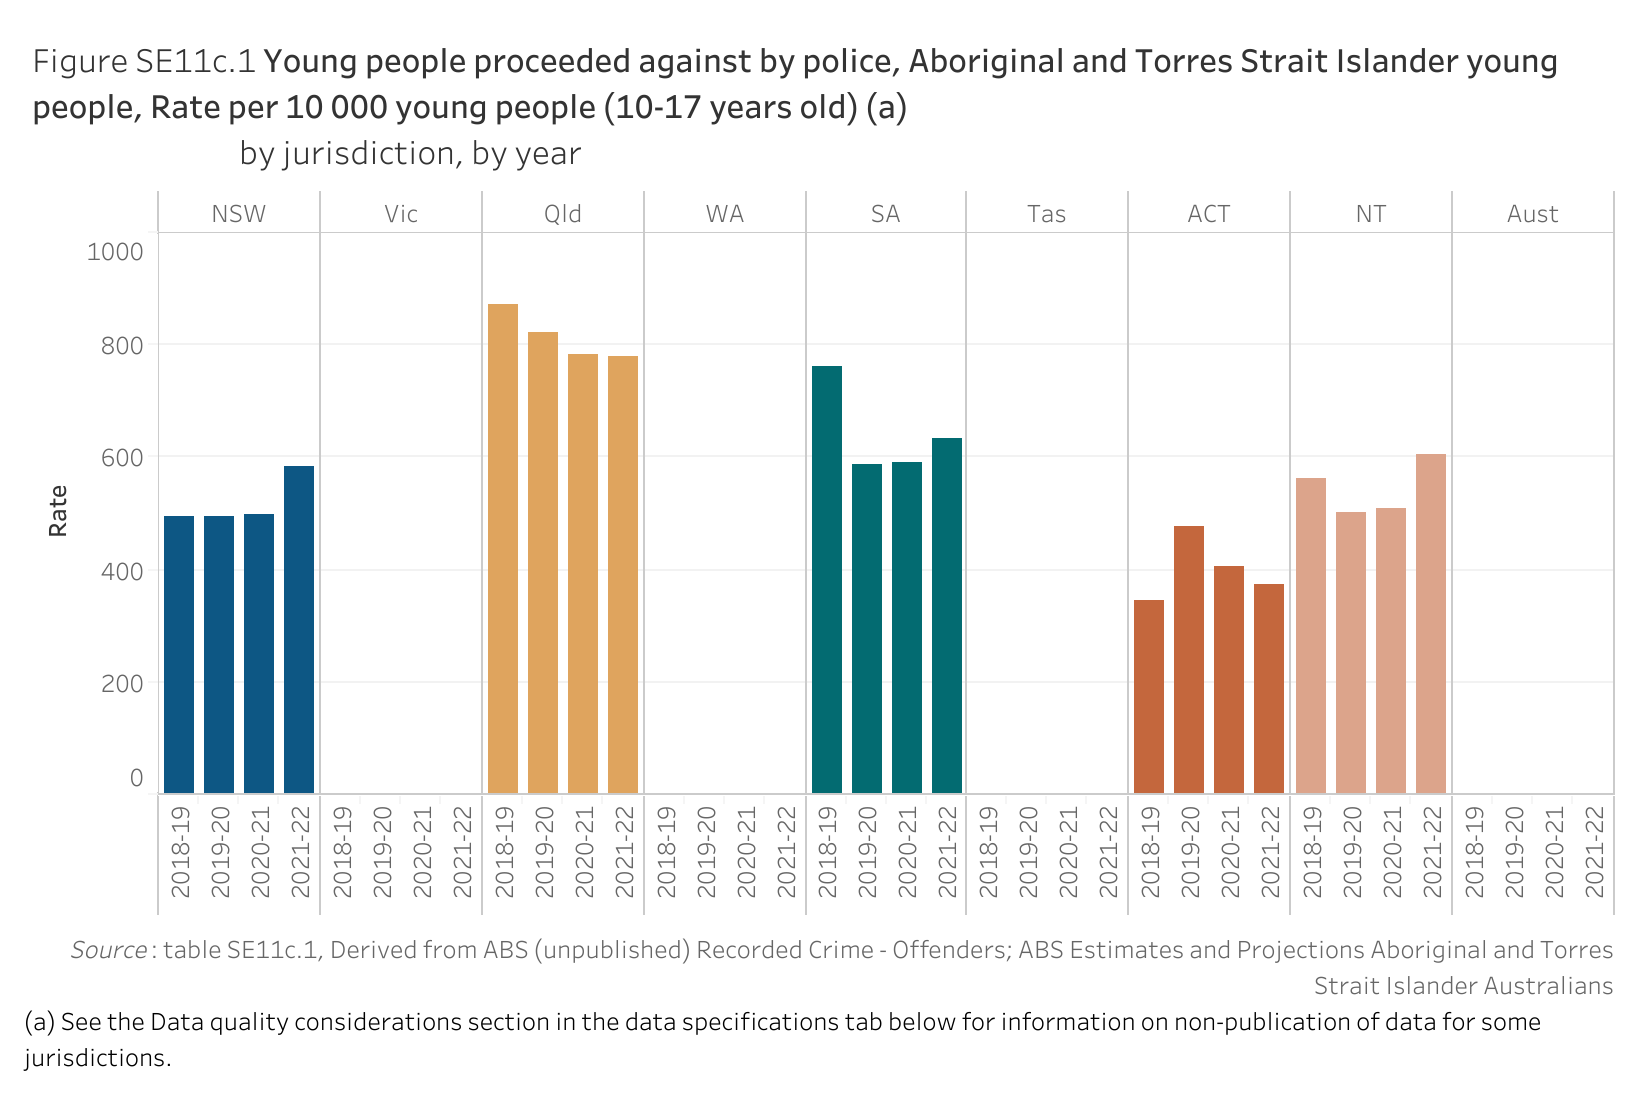 Figure SE11c.1 shows young people proceeded against by police, Aboriginal and Torres Strait Islander young people, Rate per 10 000 young people (10-17 years old), by jurisdiction, by year. More details can be found within the text near this image.